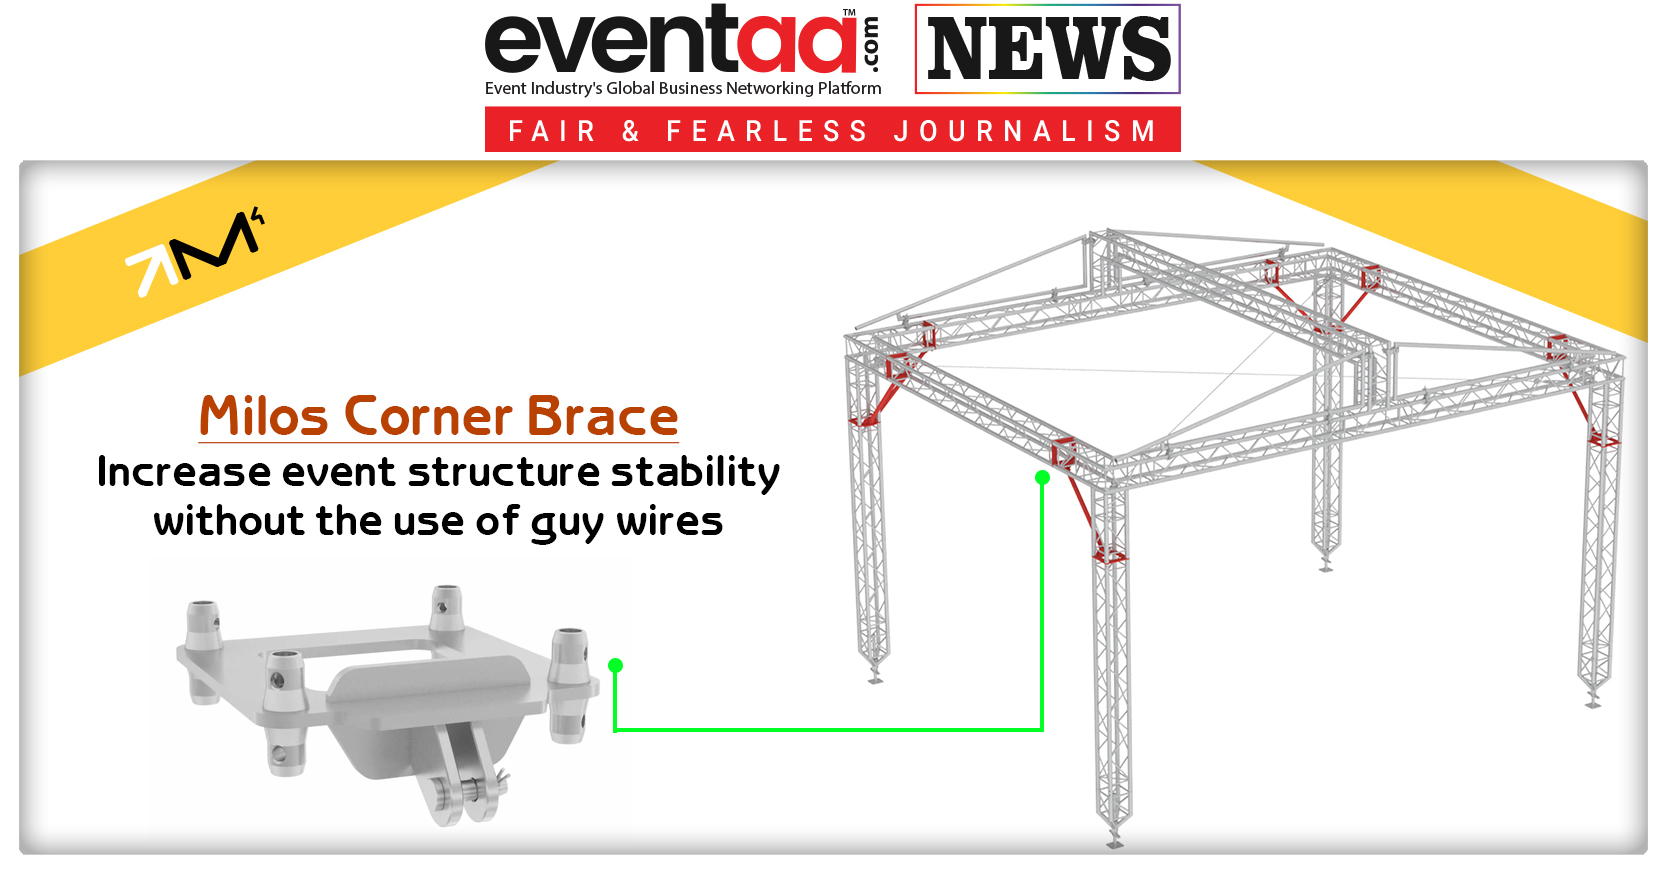 Milos Corner Brace - Increase Event Structure Stability Without the Use of Guy Wires